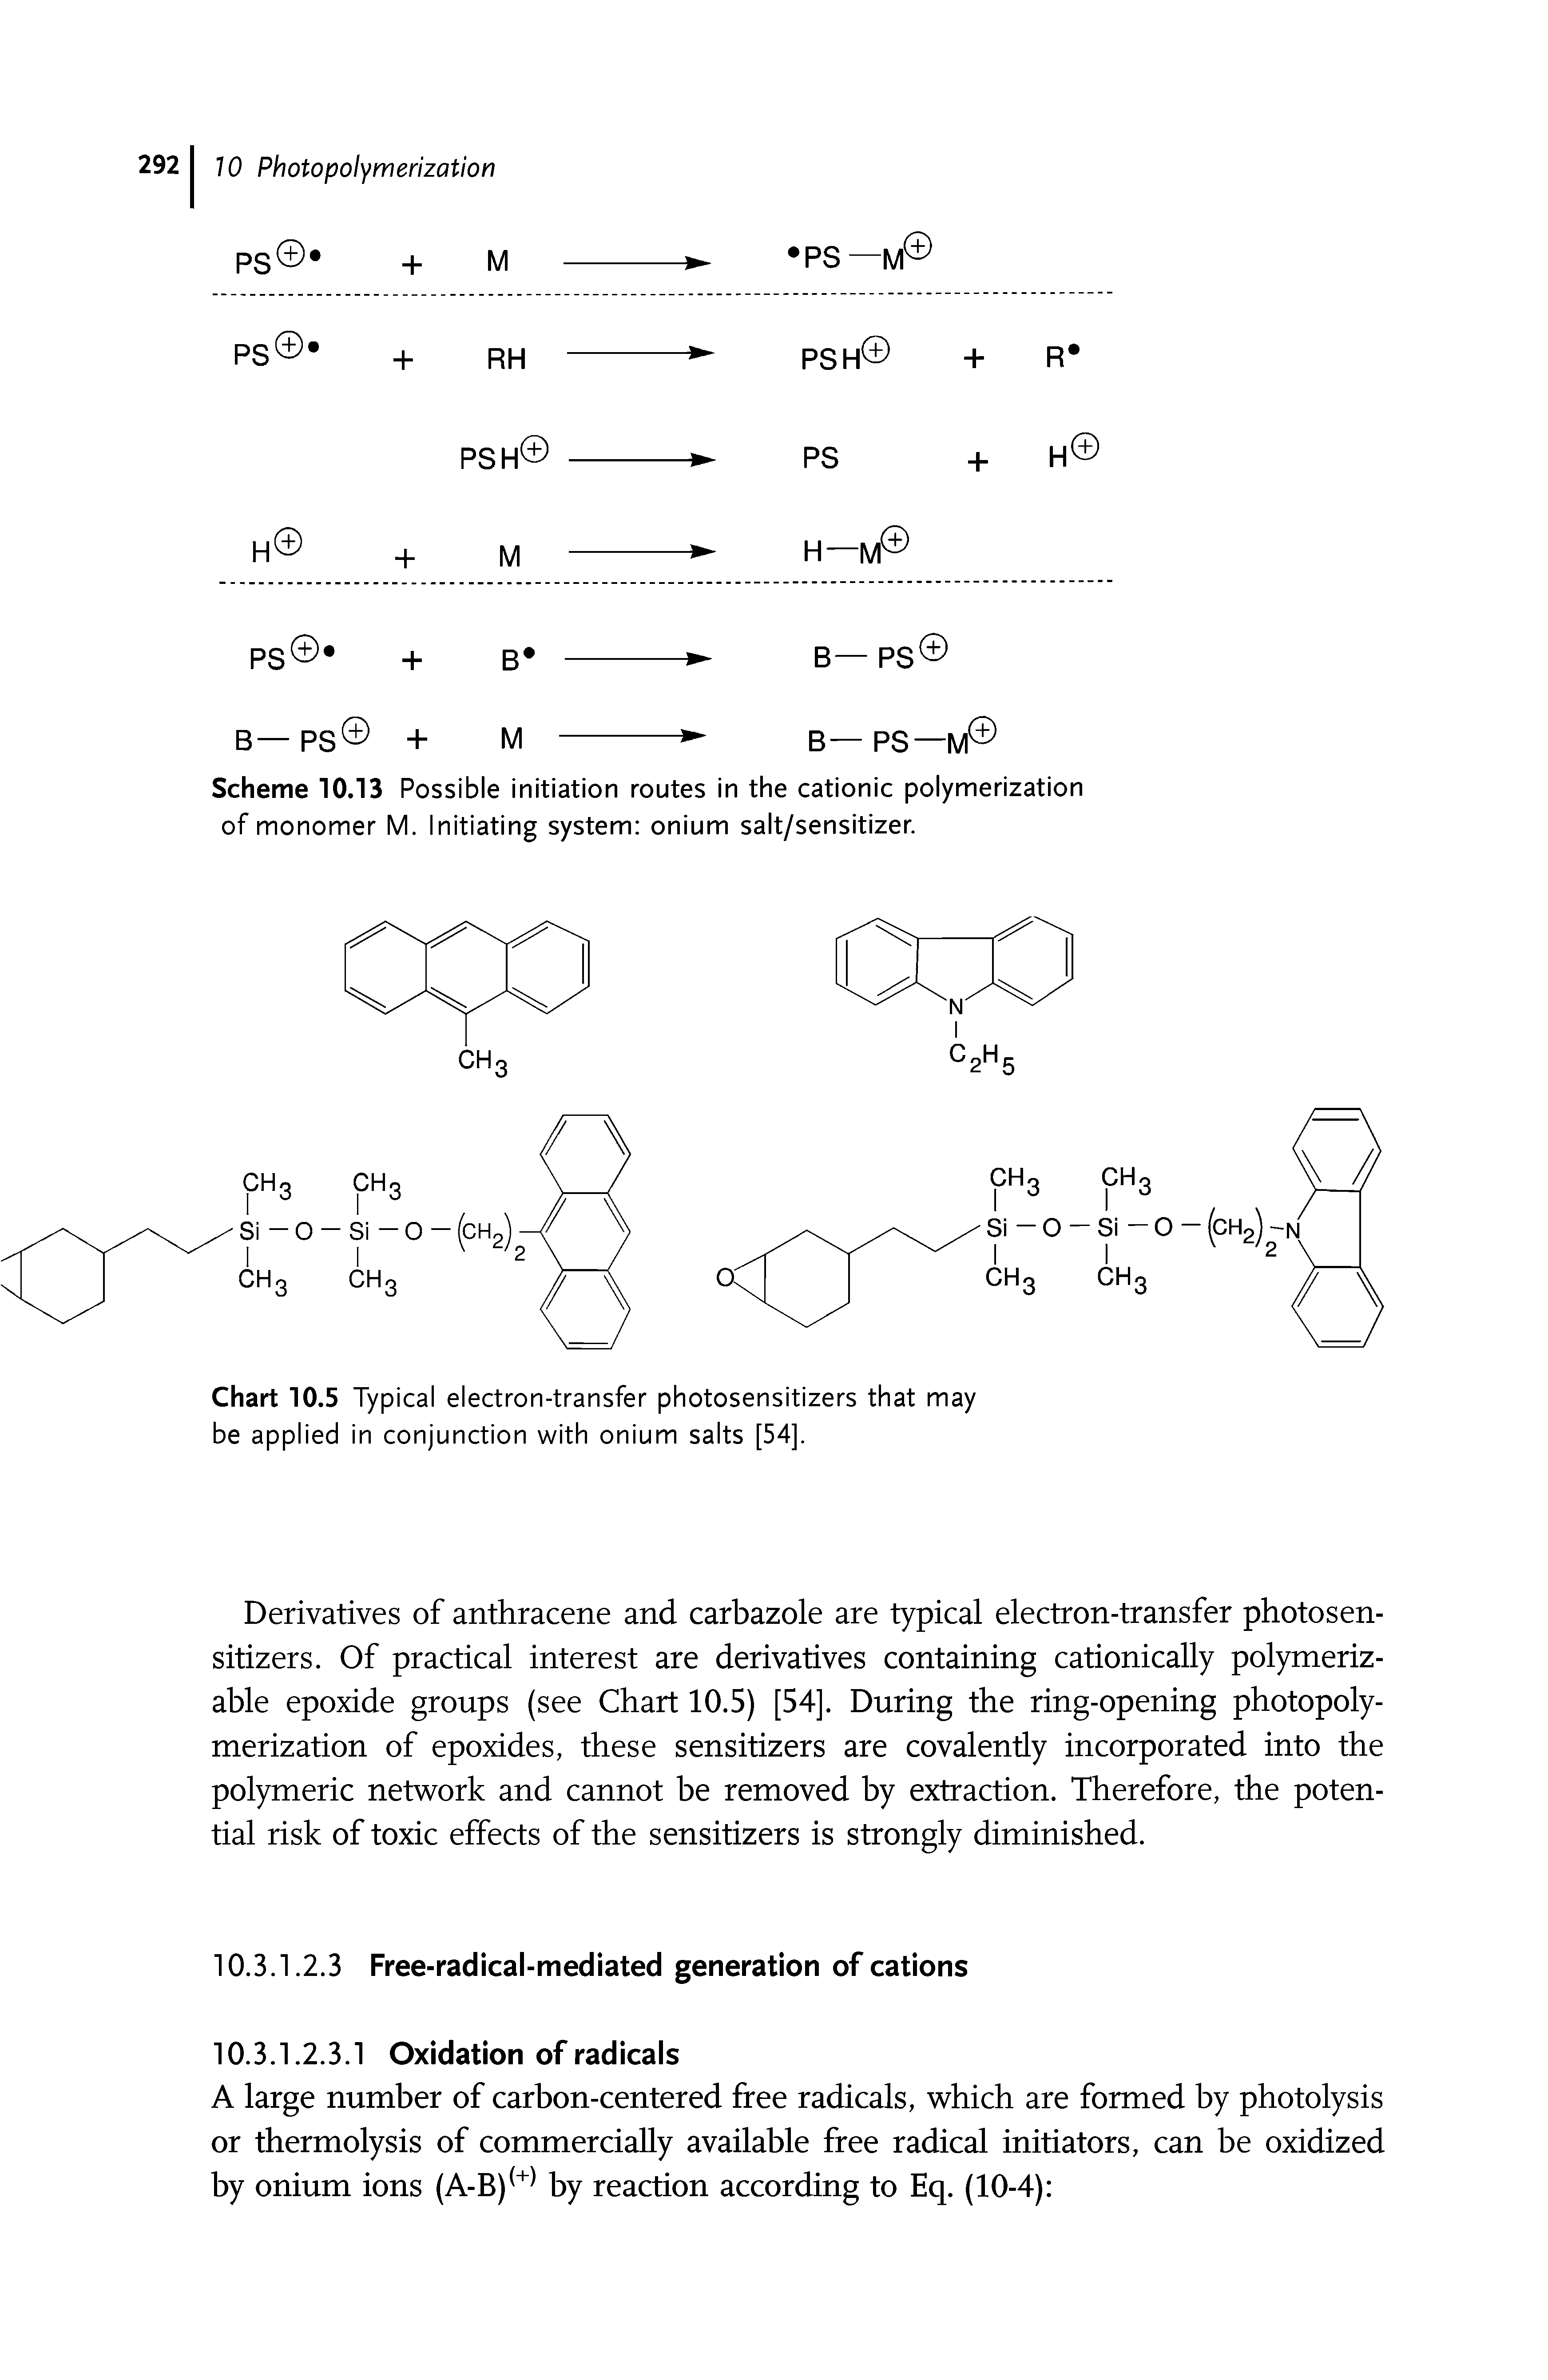 Scheme 10.13 Possible initiation routes in the cationic polymerization of monomer M. Initiating system onium salt/sensitizer.